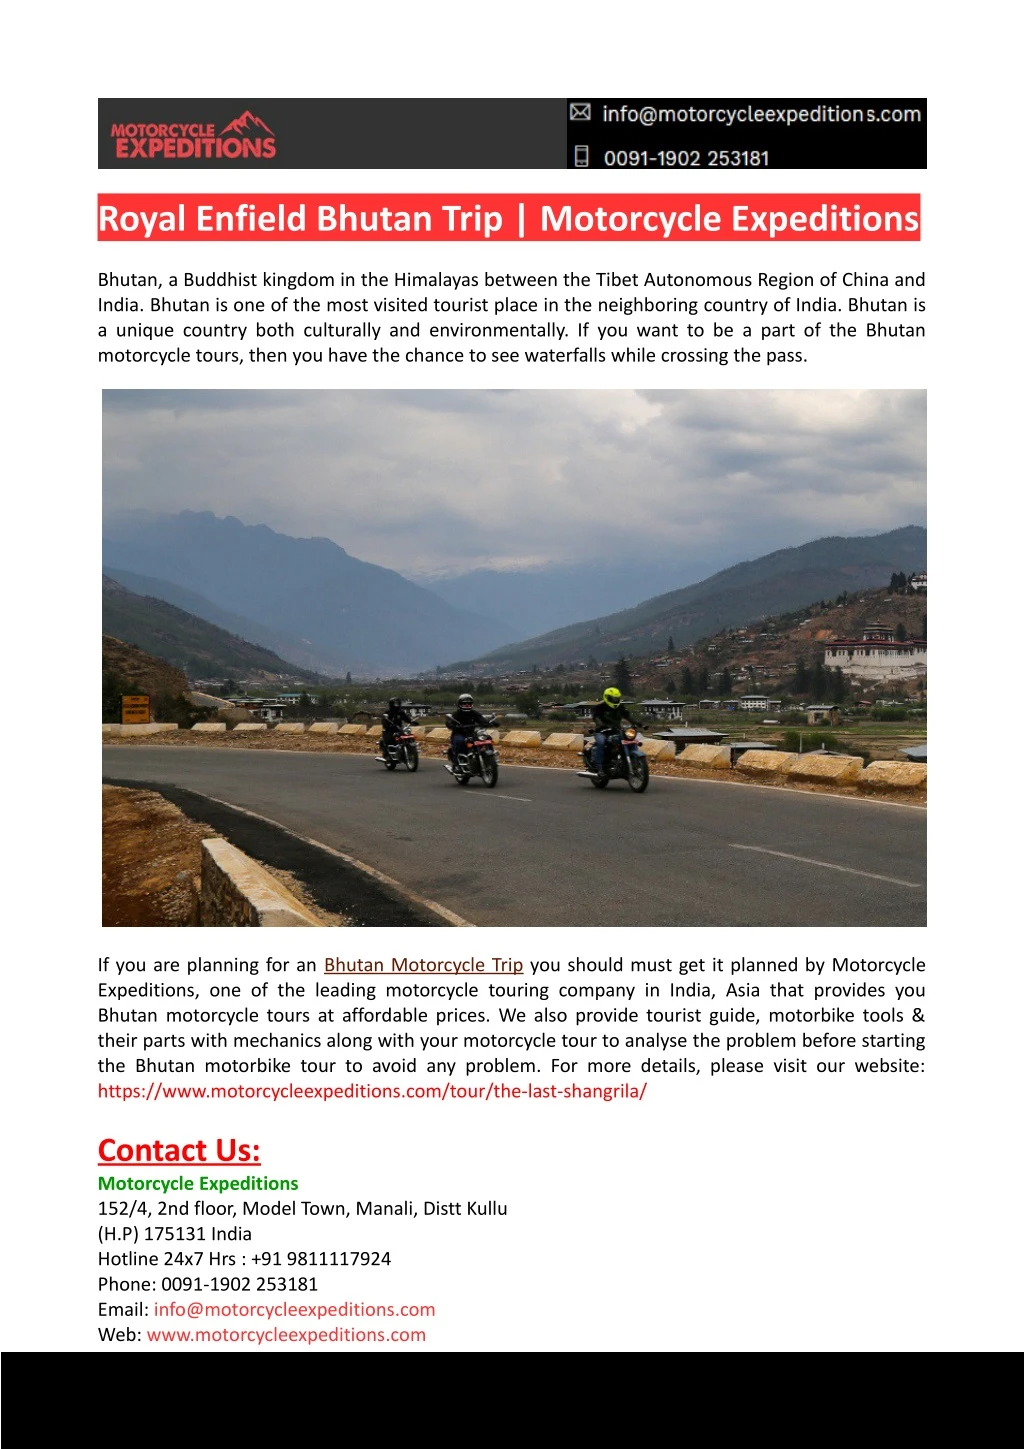 royal enfield bhutan trip motorcycle expeditions